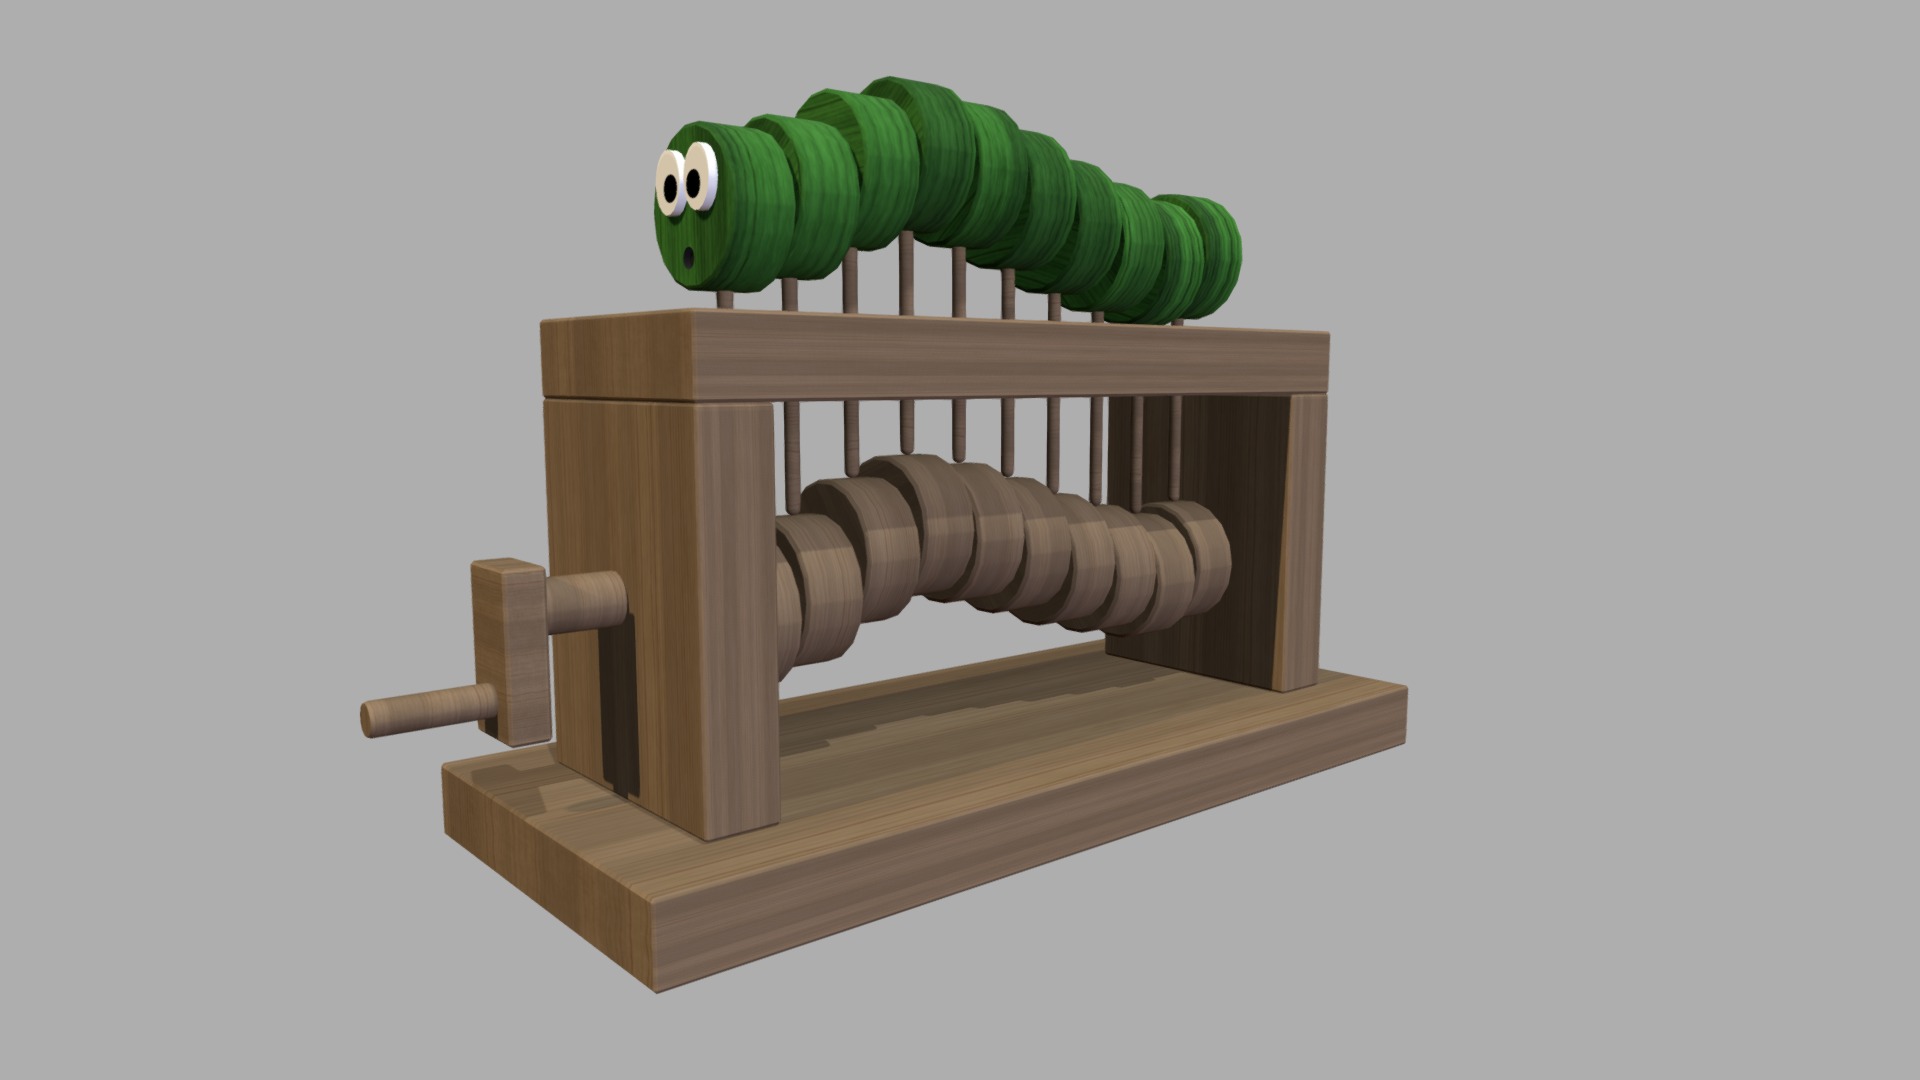 3D model Caterpillar Automata - This is a 3D model of the Caterpillar Automata. The 3D model is about a wooden shelf with a green toy on top.